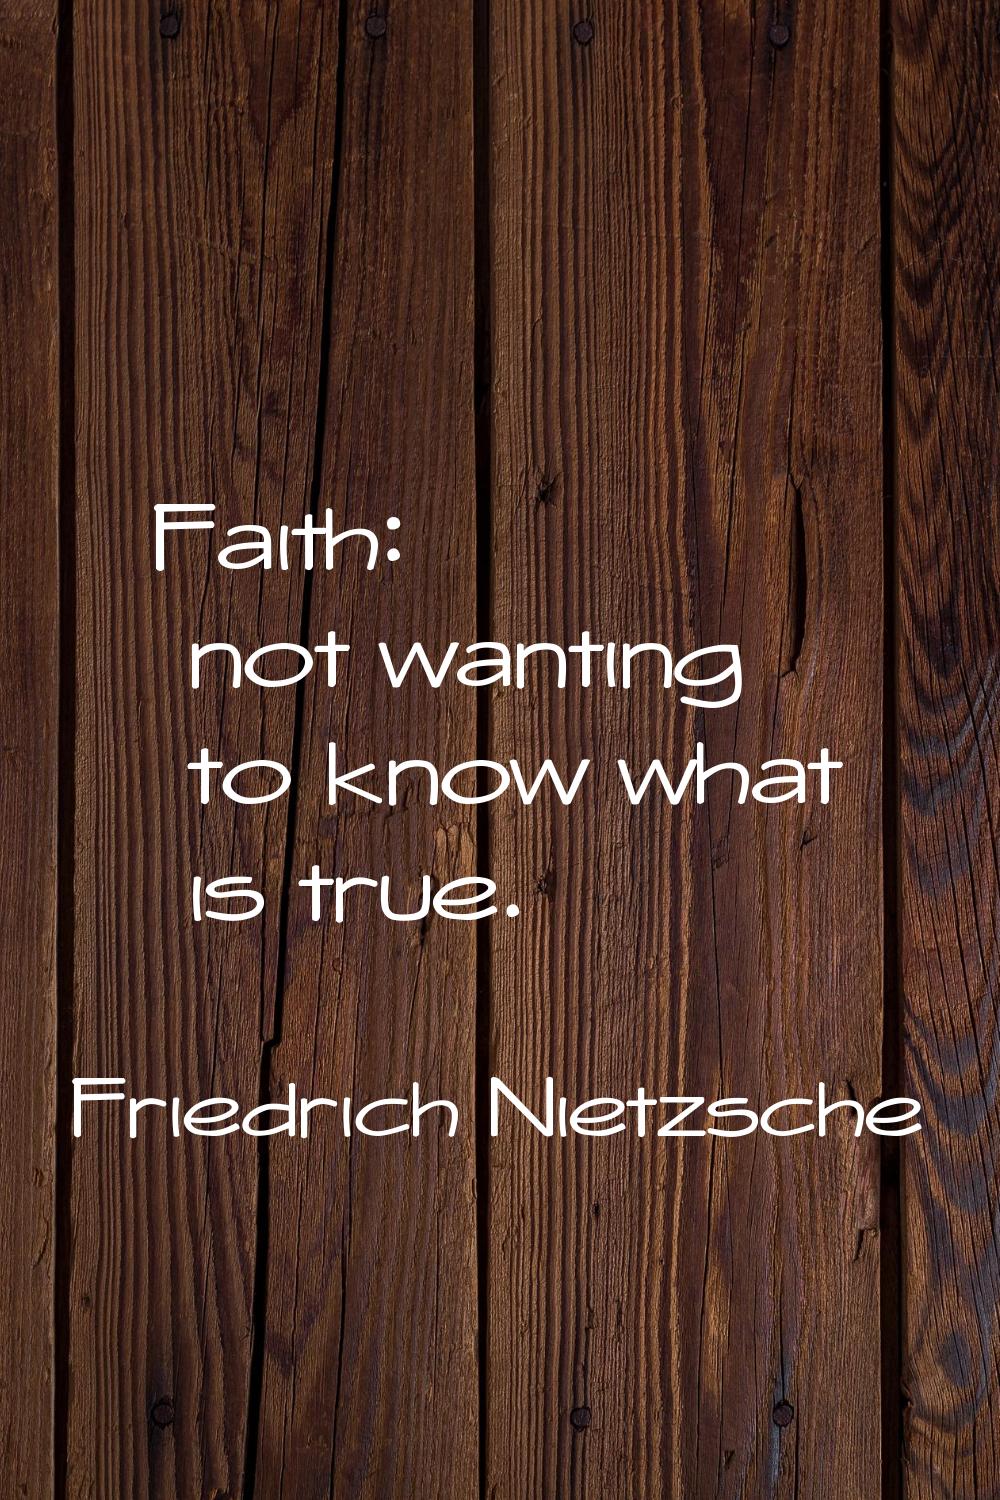 Faith: not wanting to know what is true.